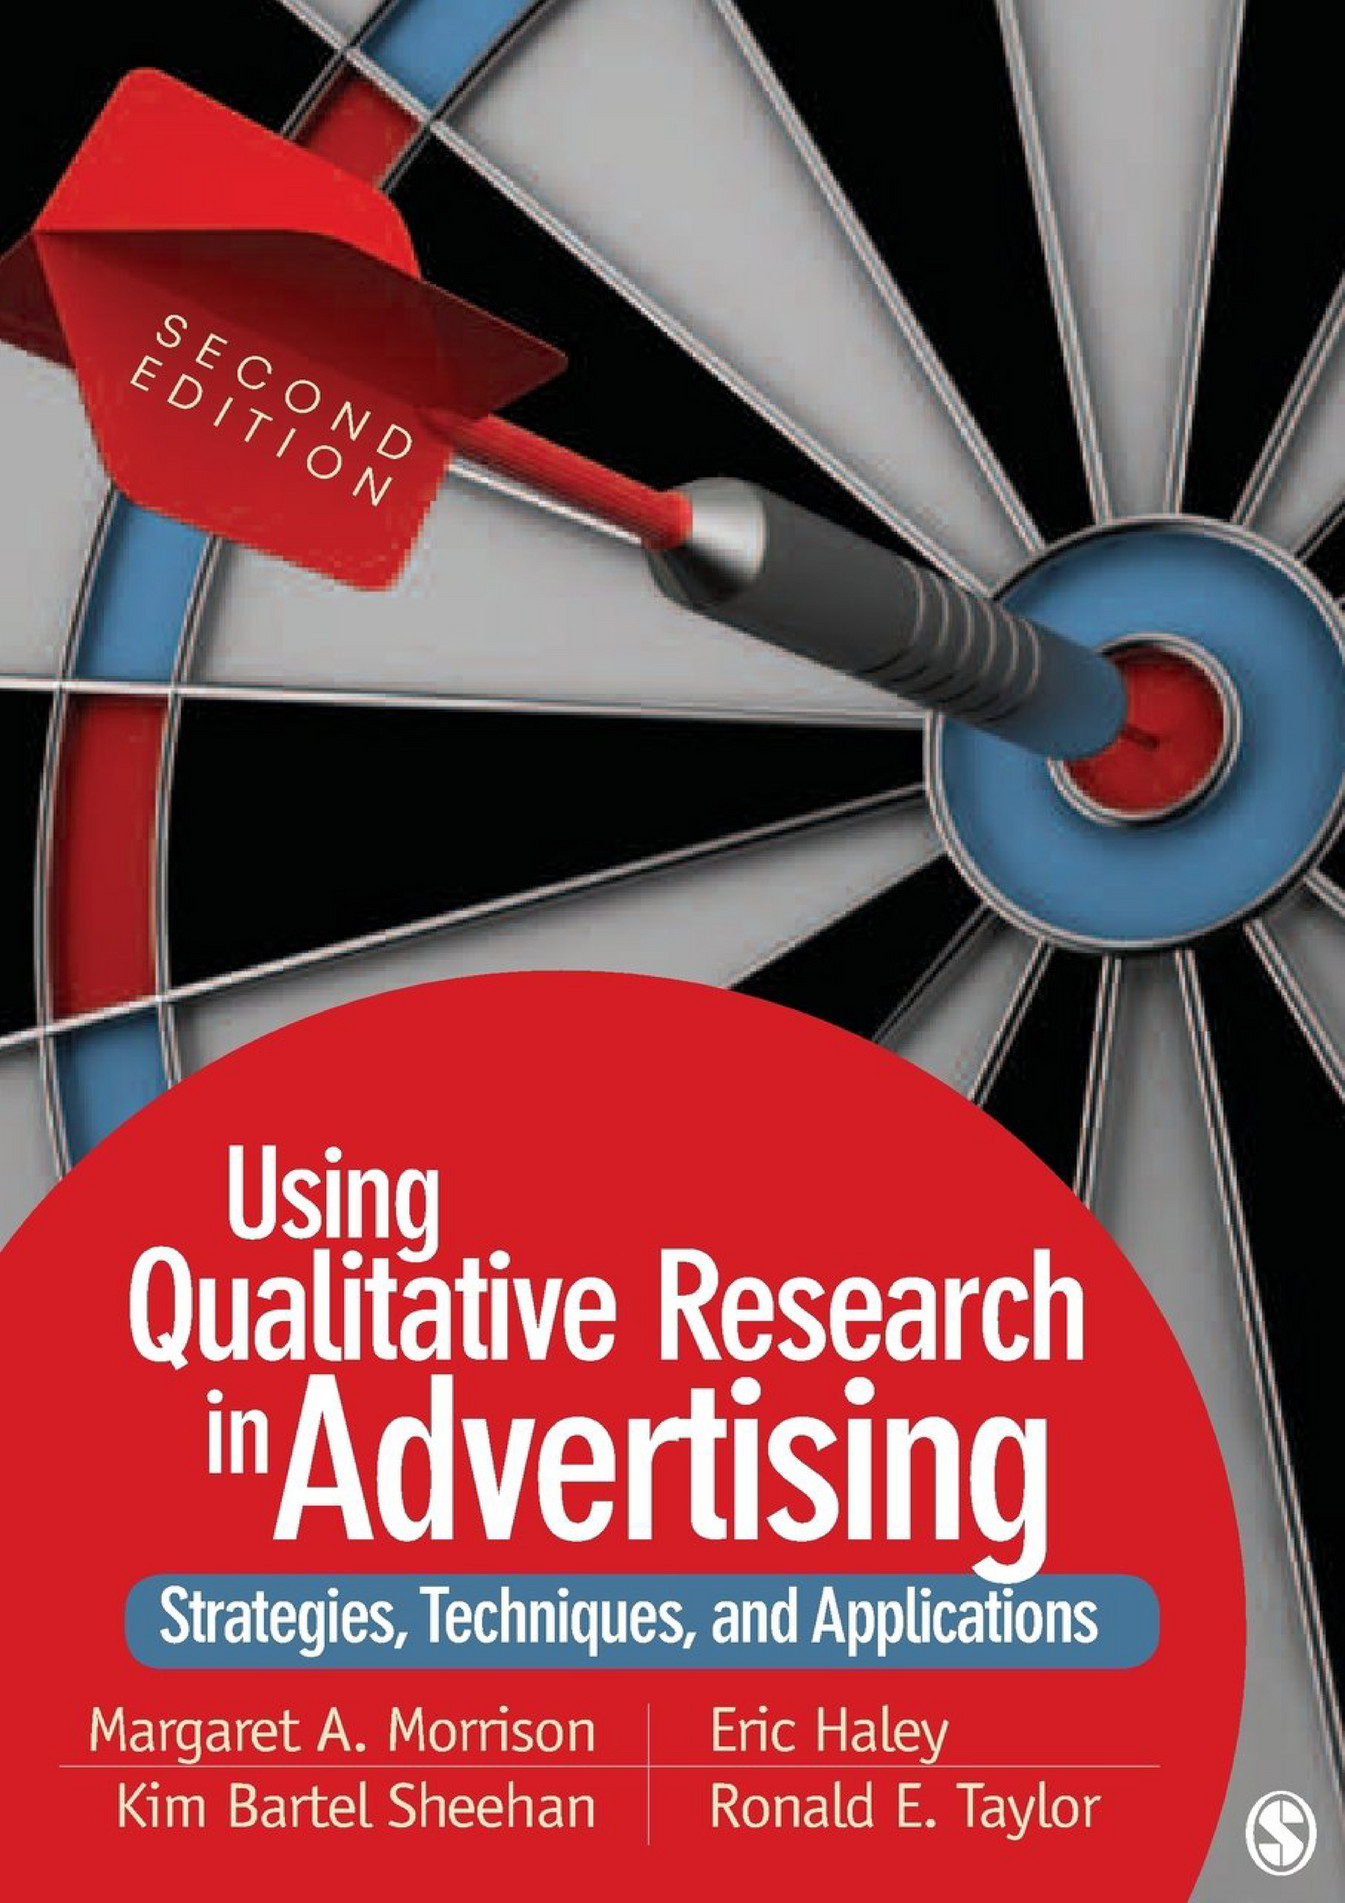 research topics on advertising